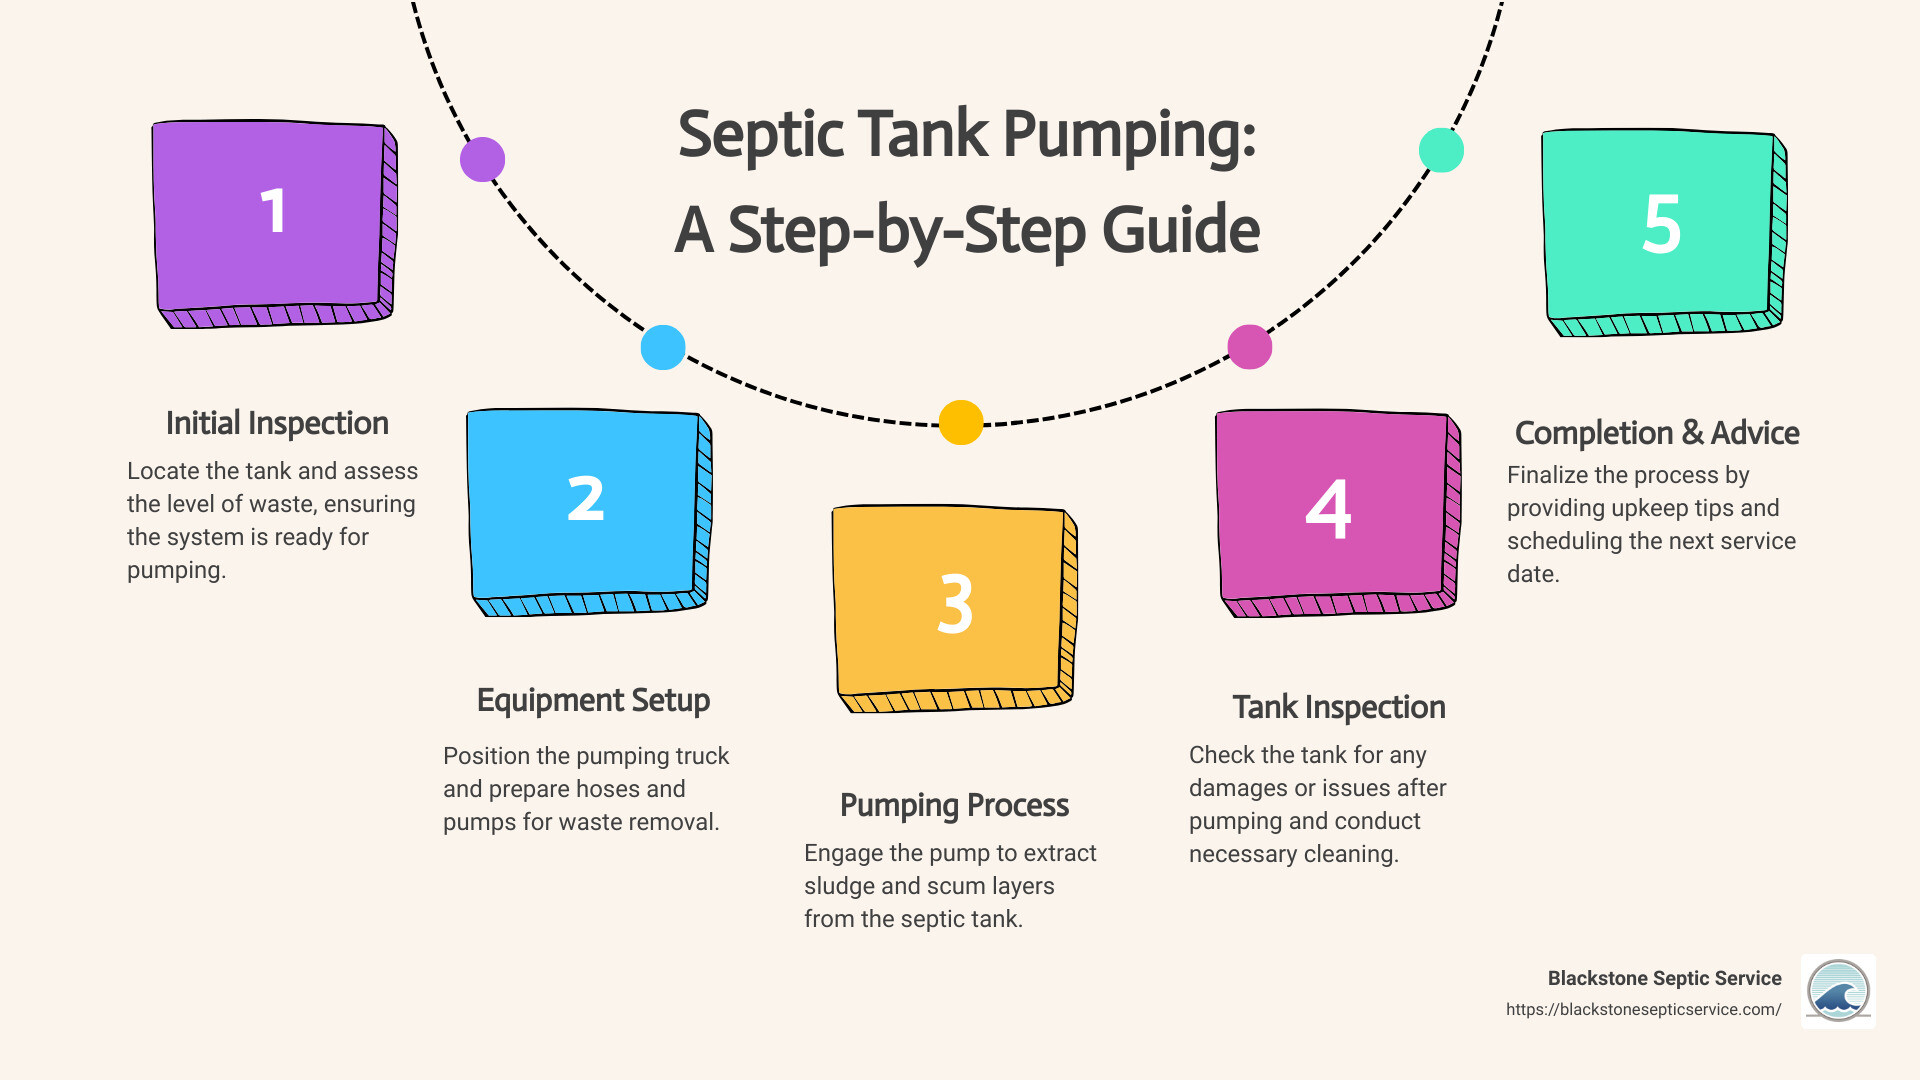 septic system inspected regularly - garbage disposal 